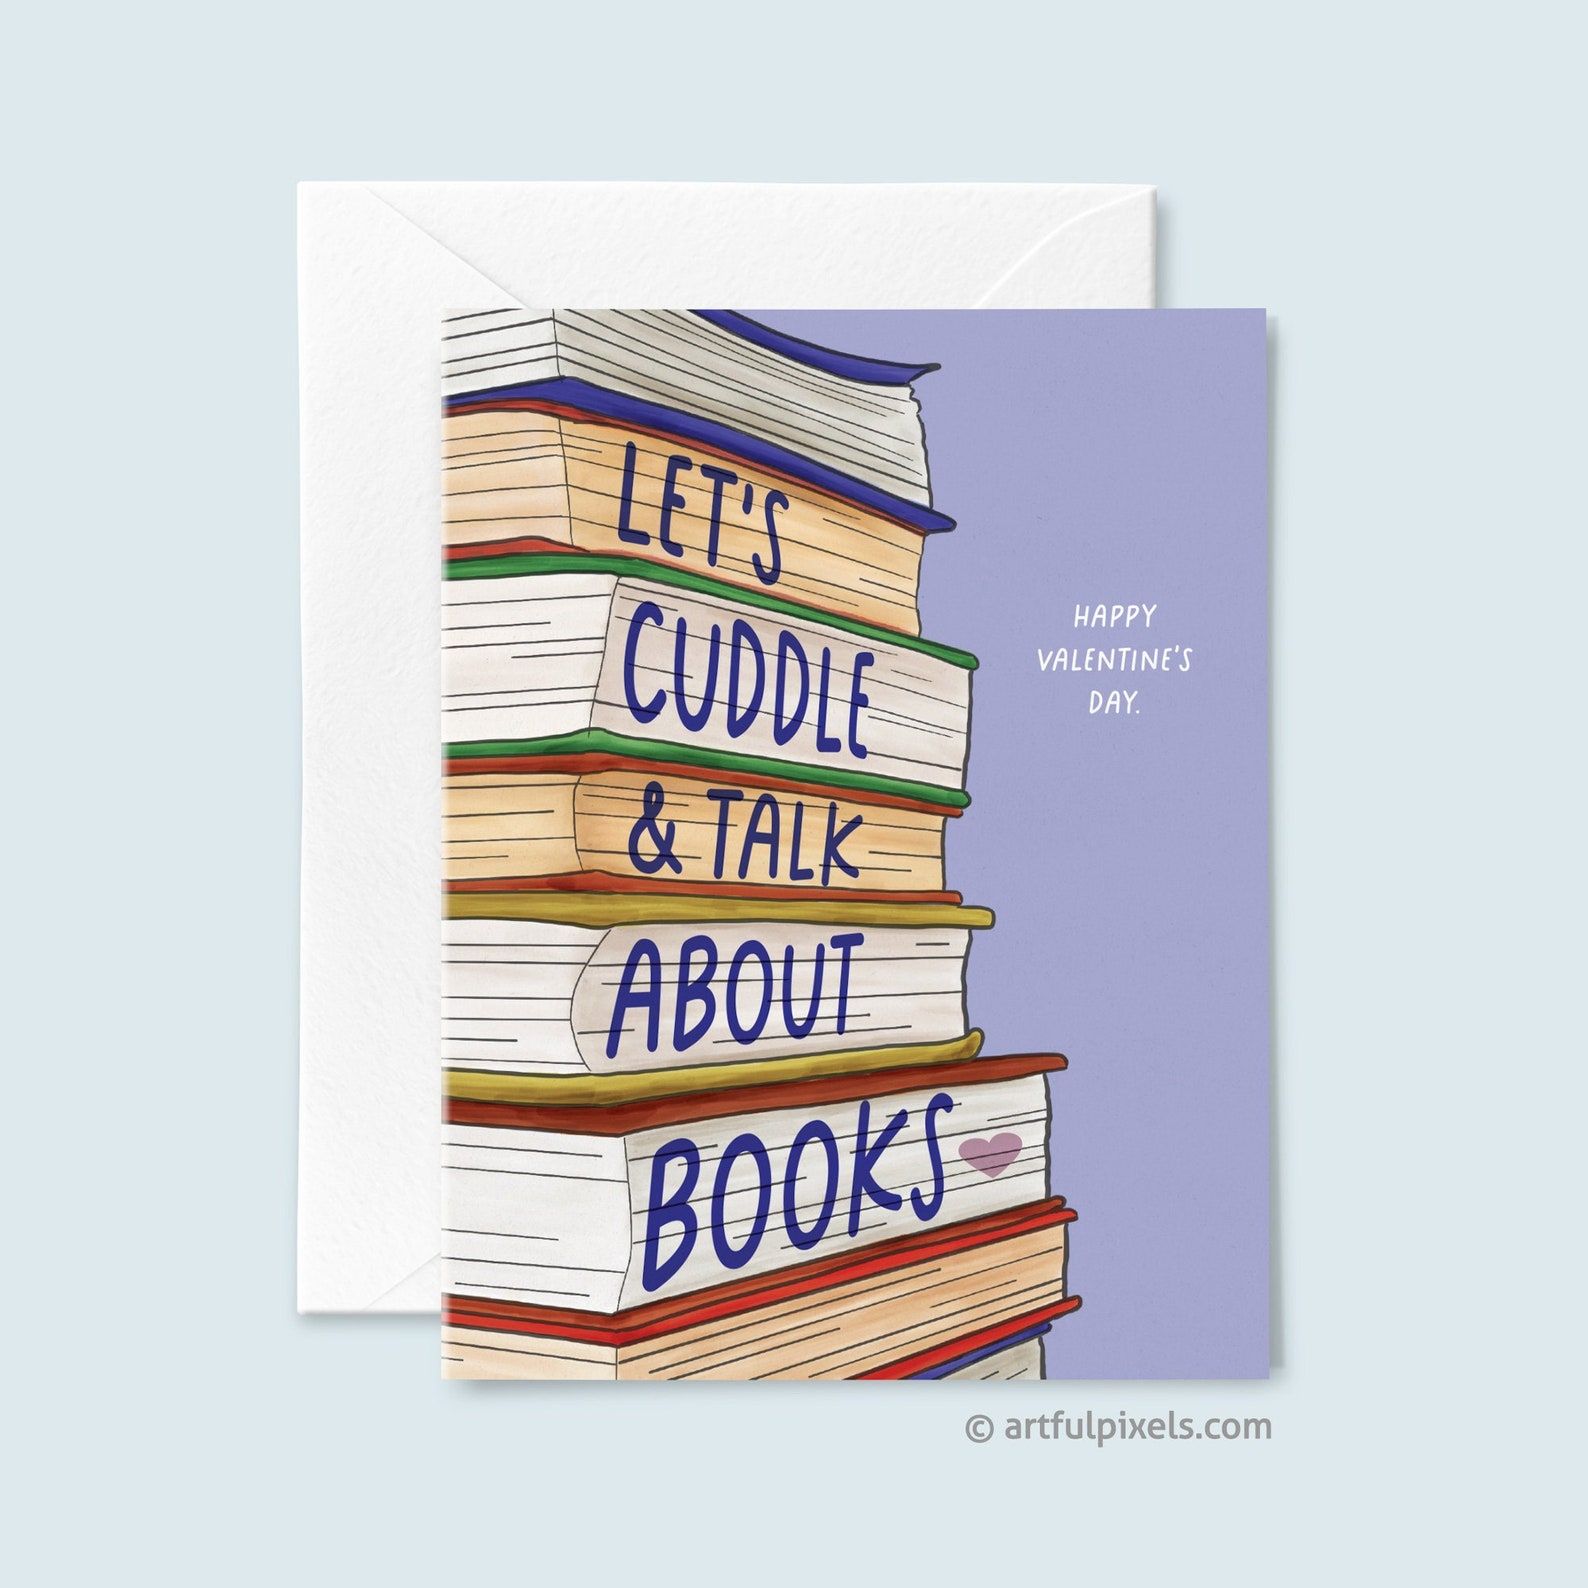 A purple card with a stack of books that reads "Let's cuddle and talk books" and "Happy Valentine's Day"